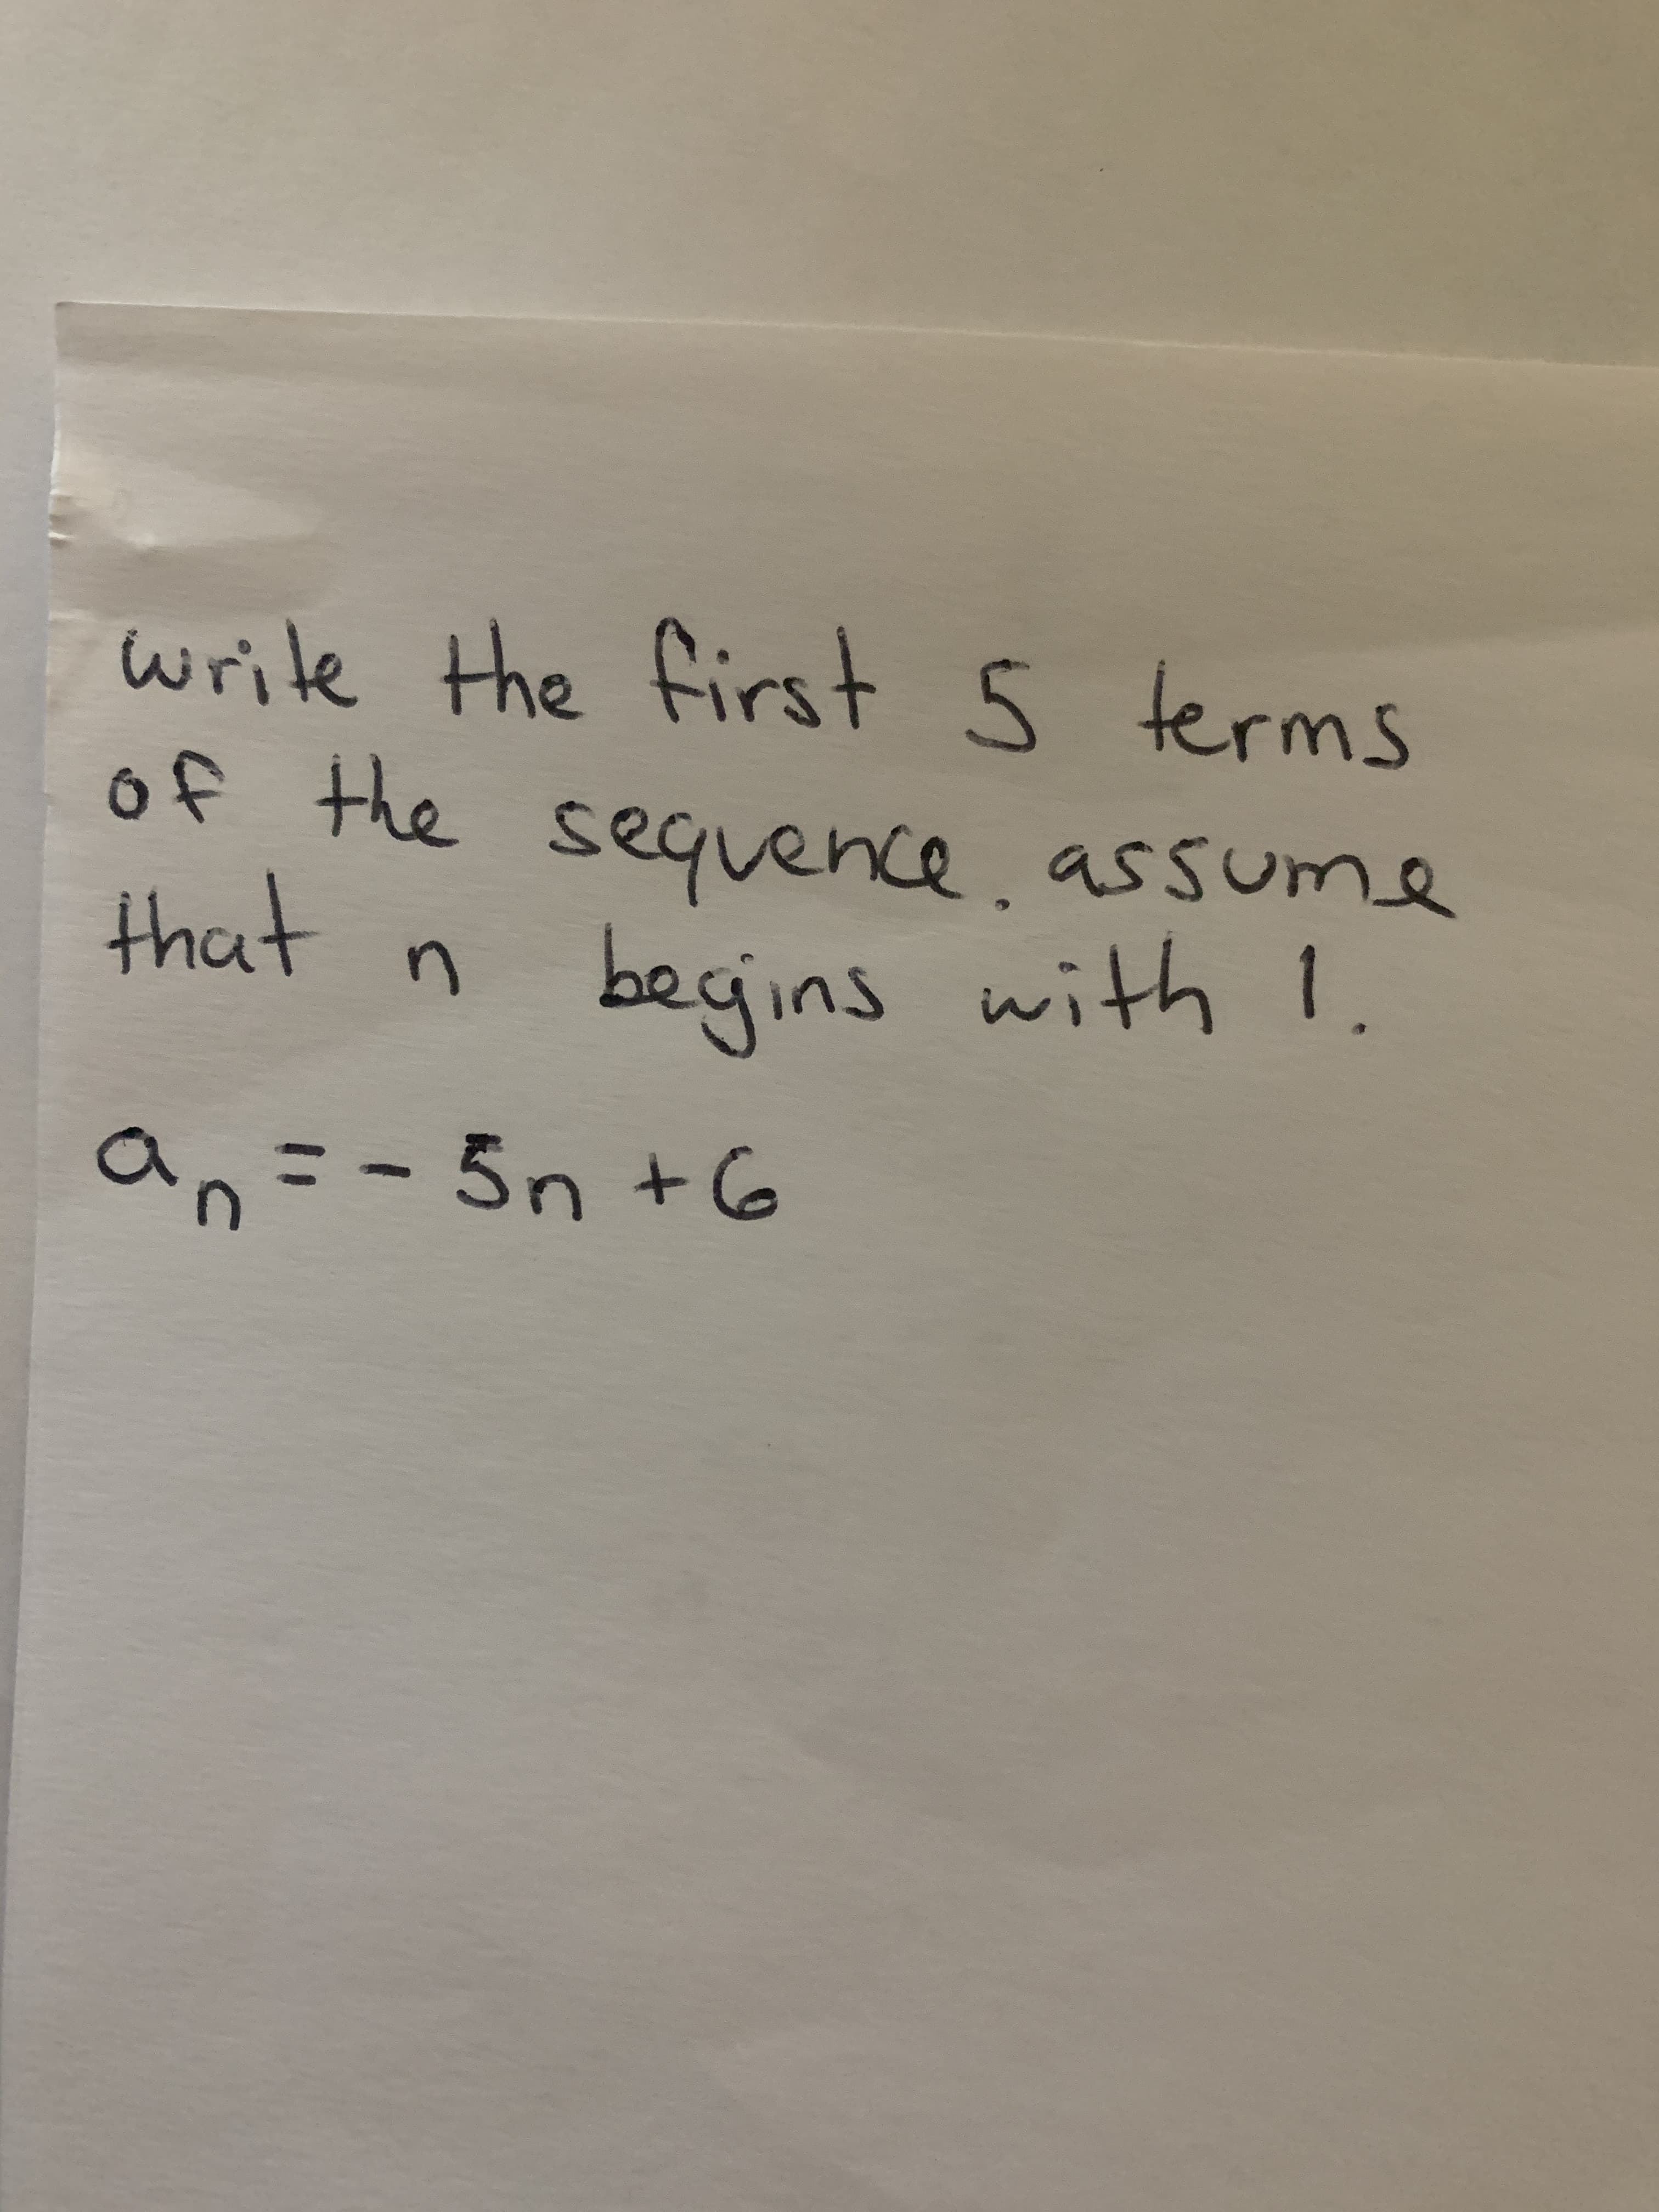 write the first S terms
of the sequence.assume
that
begins with 1.
a=-5n +6
